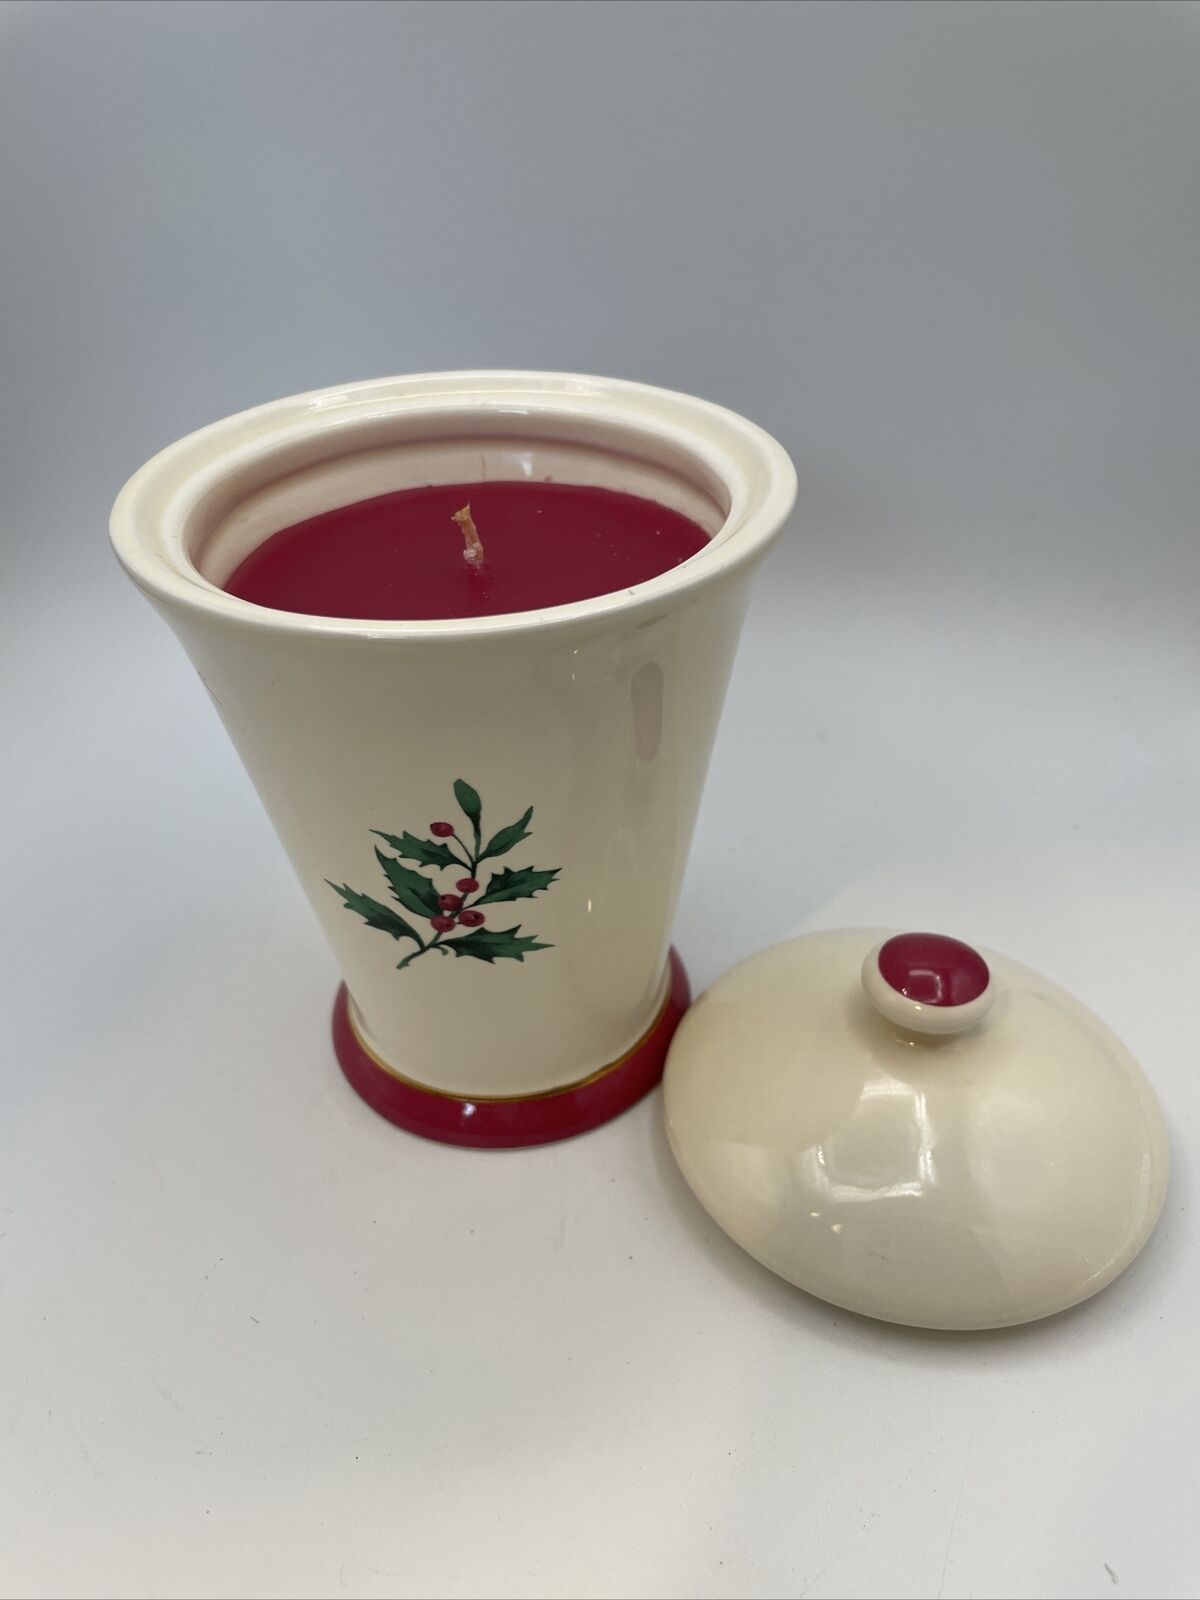 Hallmark Christmas Candle in Covered Ceramic Holder